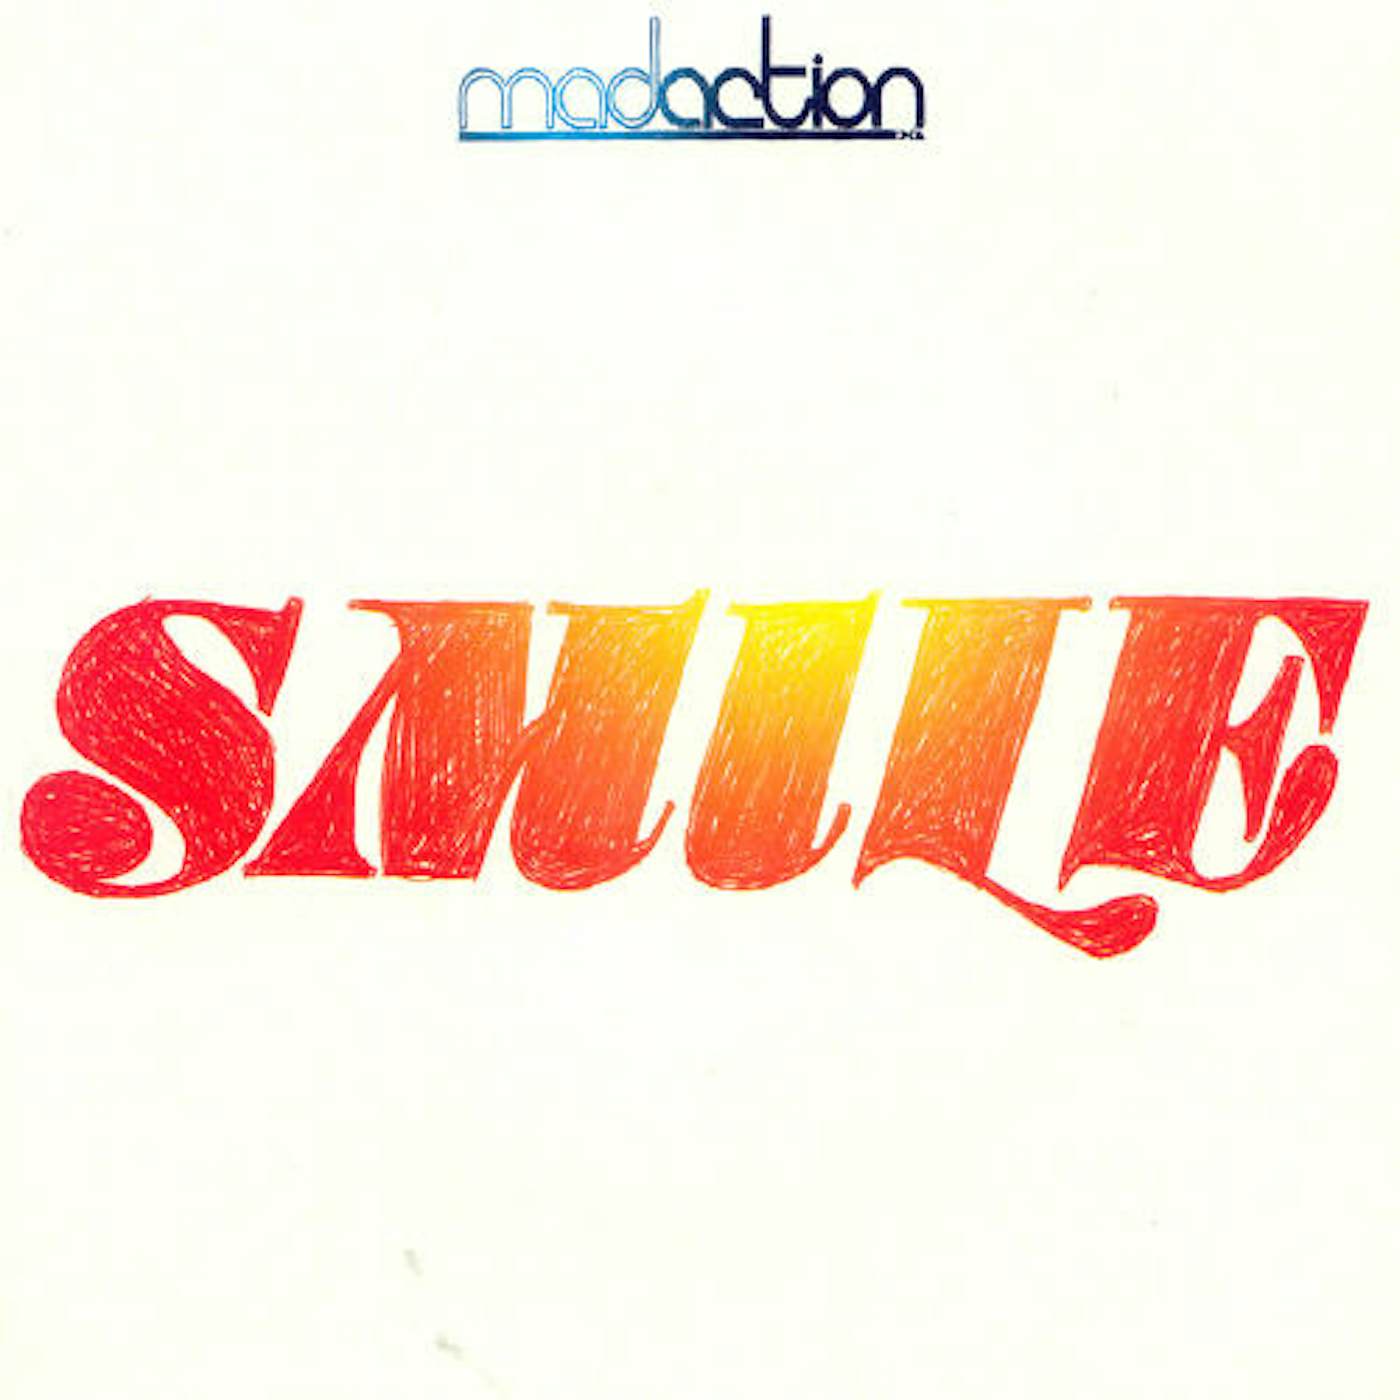 Mad Action Smile Vinyl Record